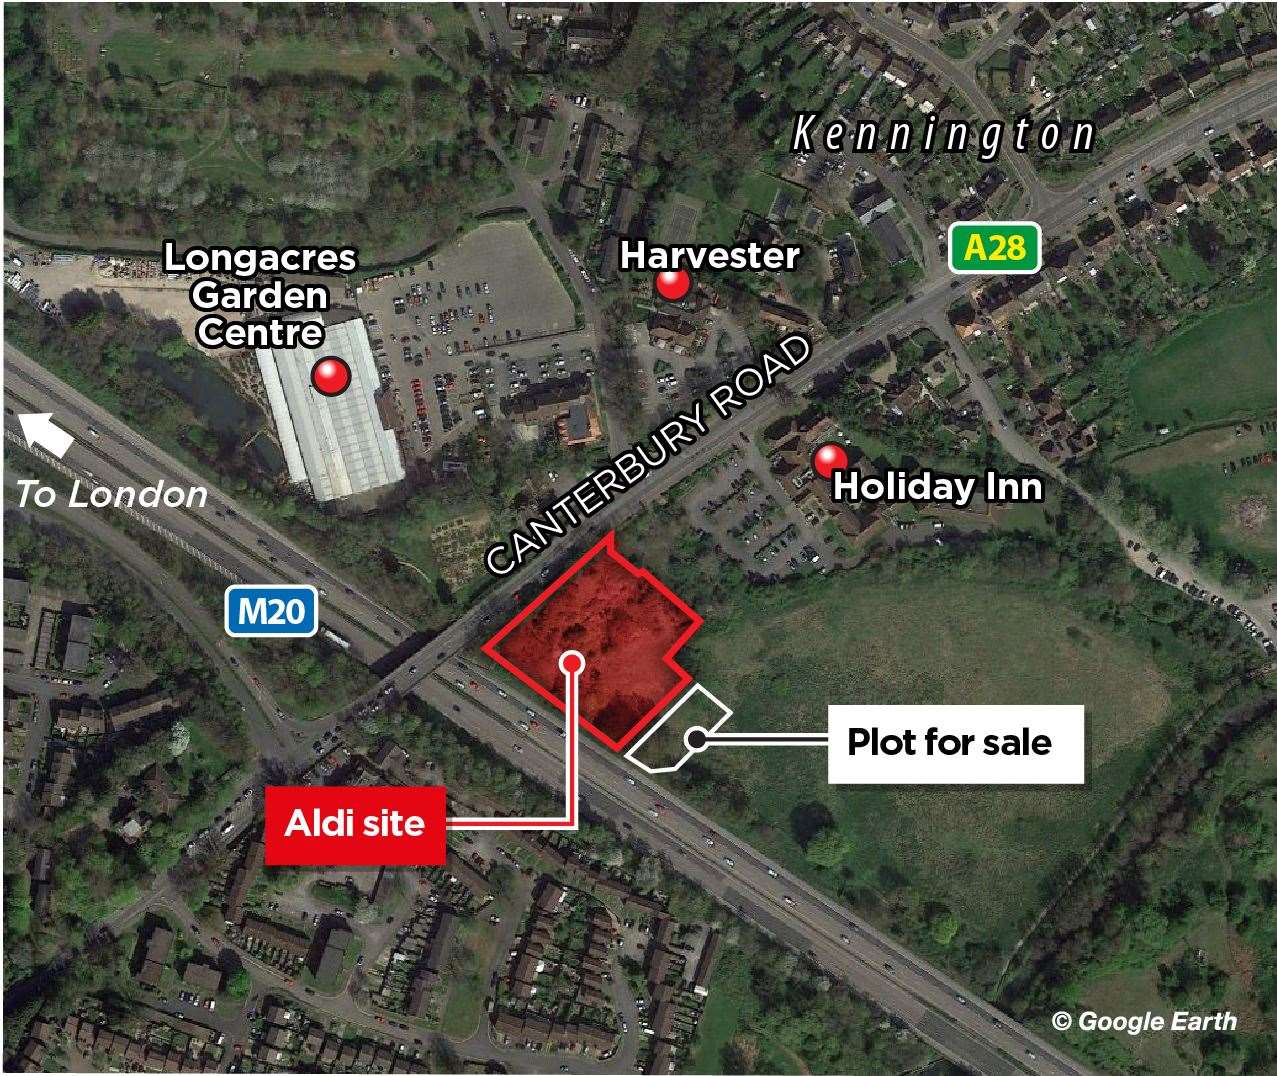 A smaller plot of land has been earmarked for sale